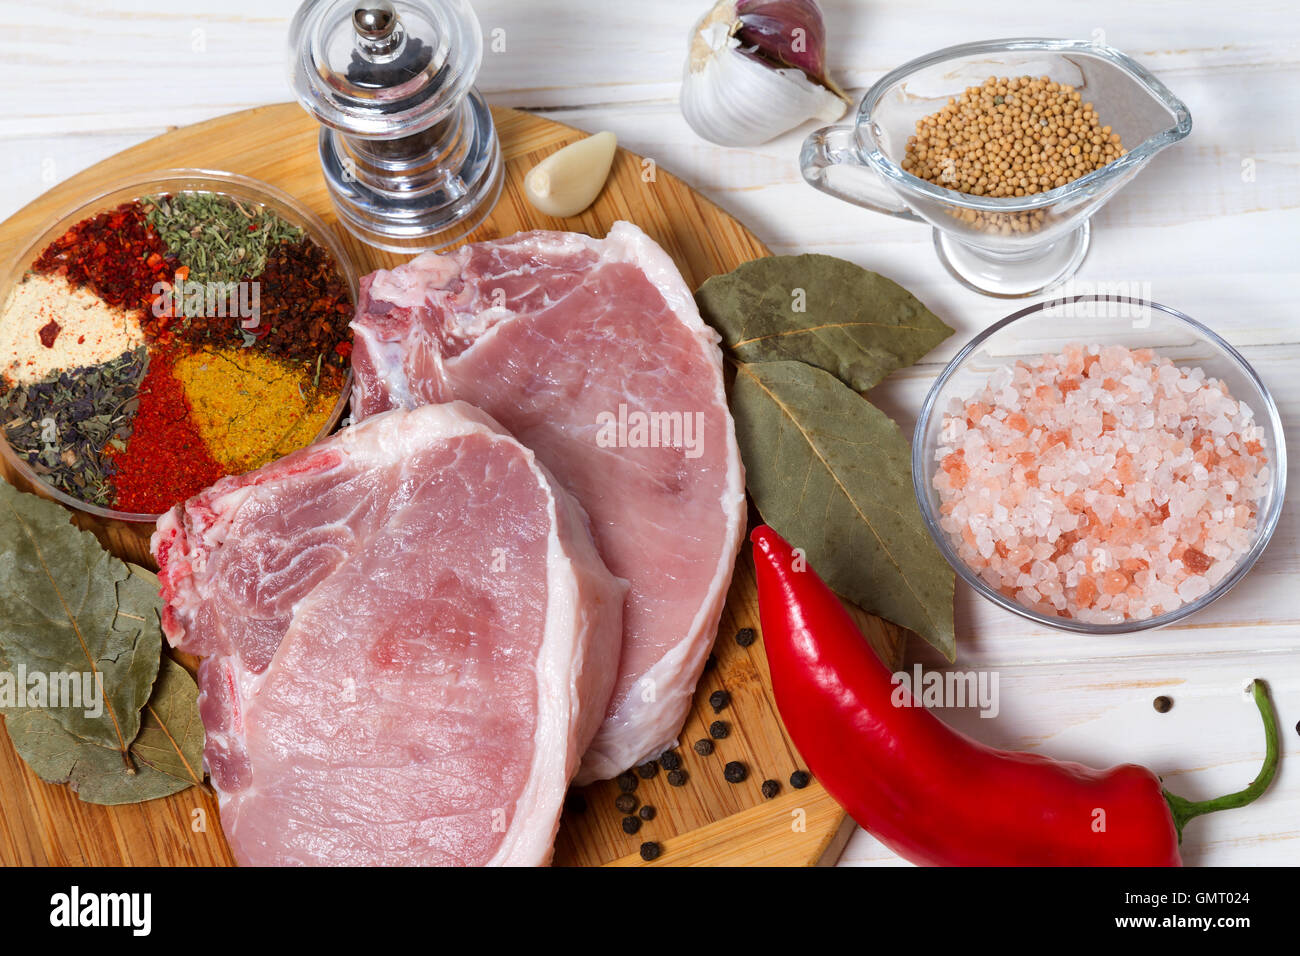 Entrecote and spices for cooking meat on a wooden board Stock Photo